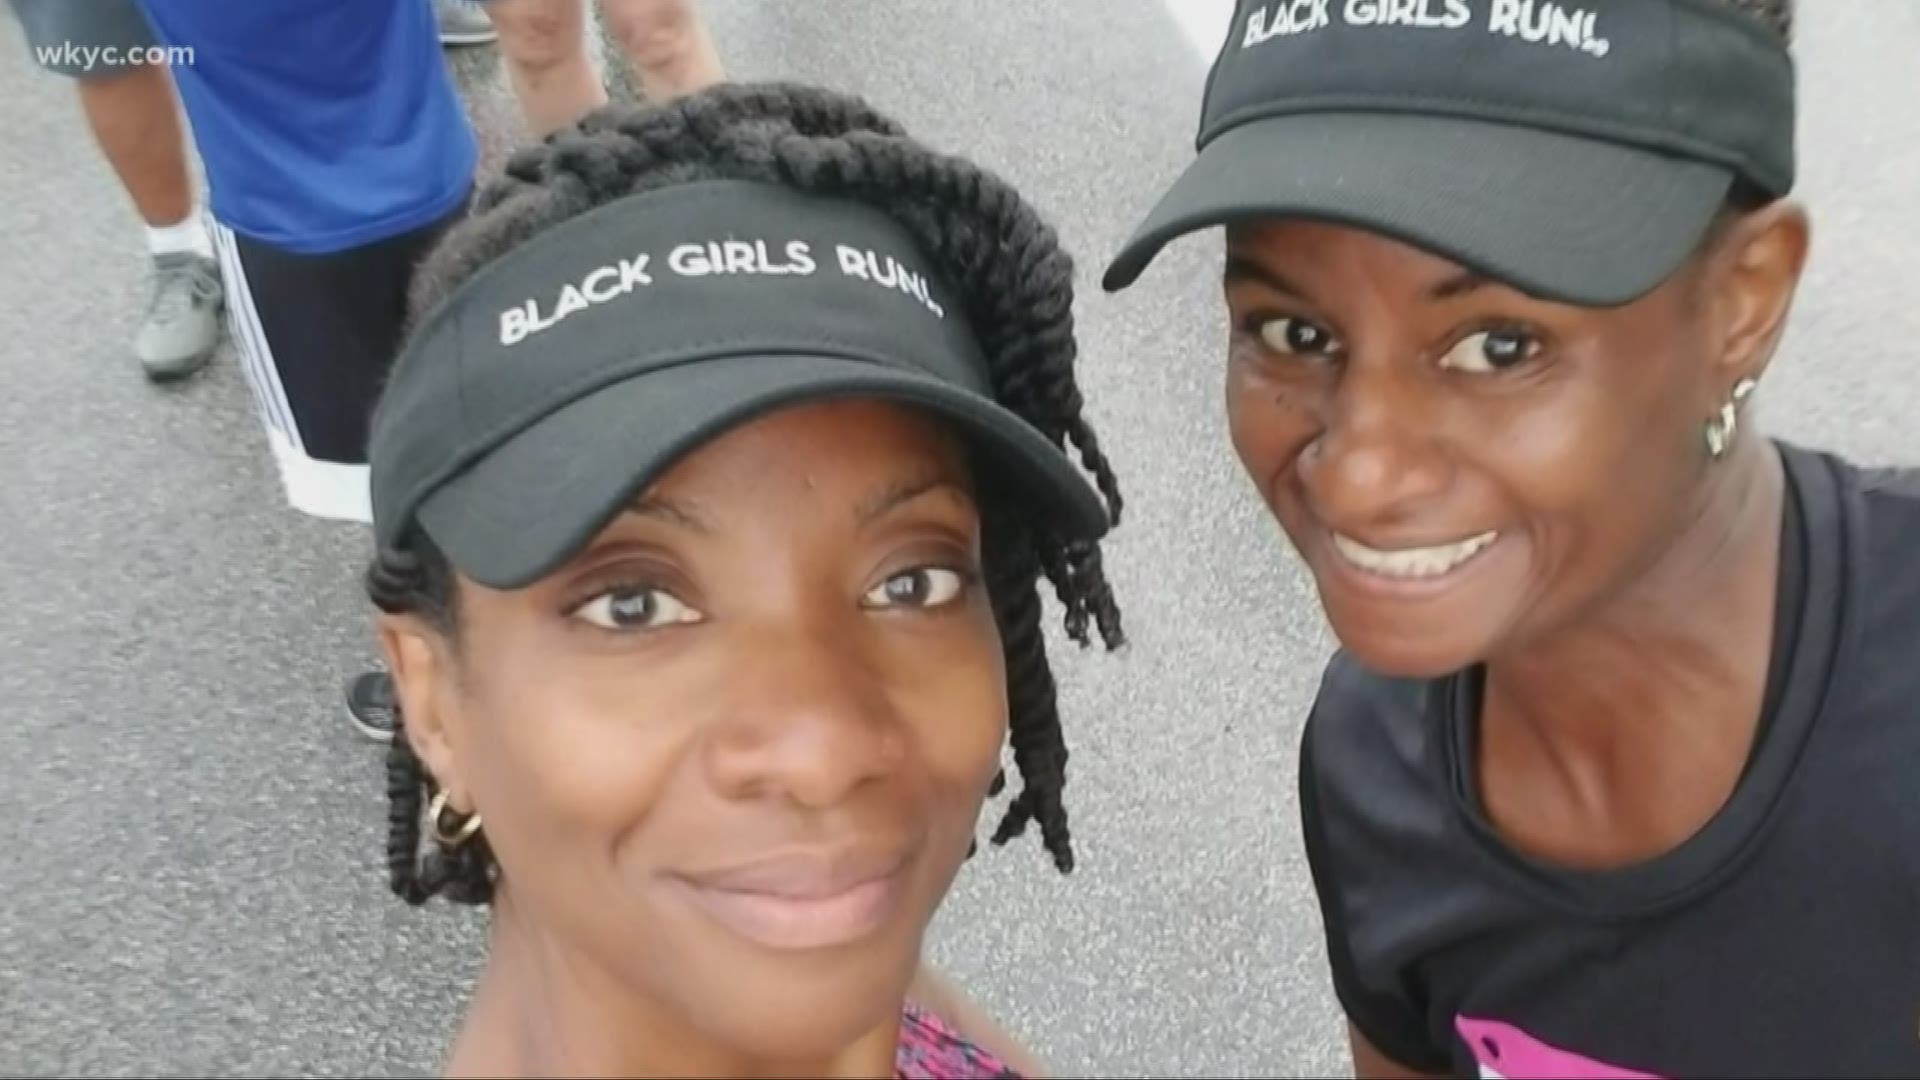 It’s a new year and for a lot of people that means a new push toward health and fitness. Black Girls Run Cleveland! is open to everyone and changing lives.